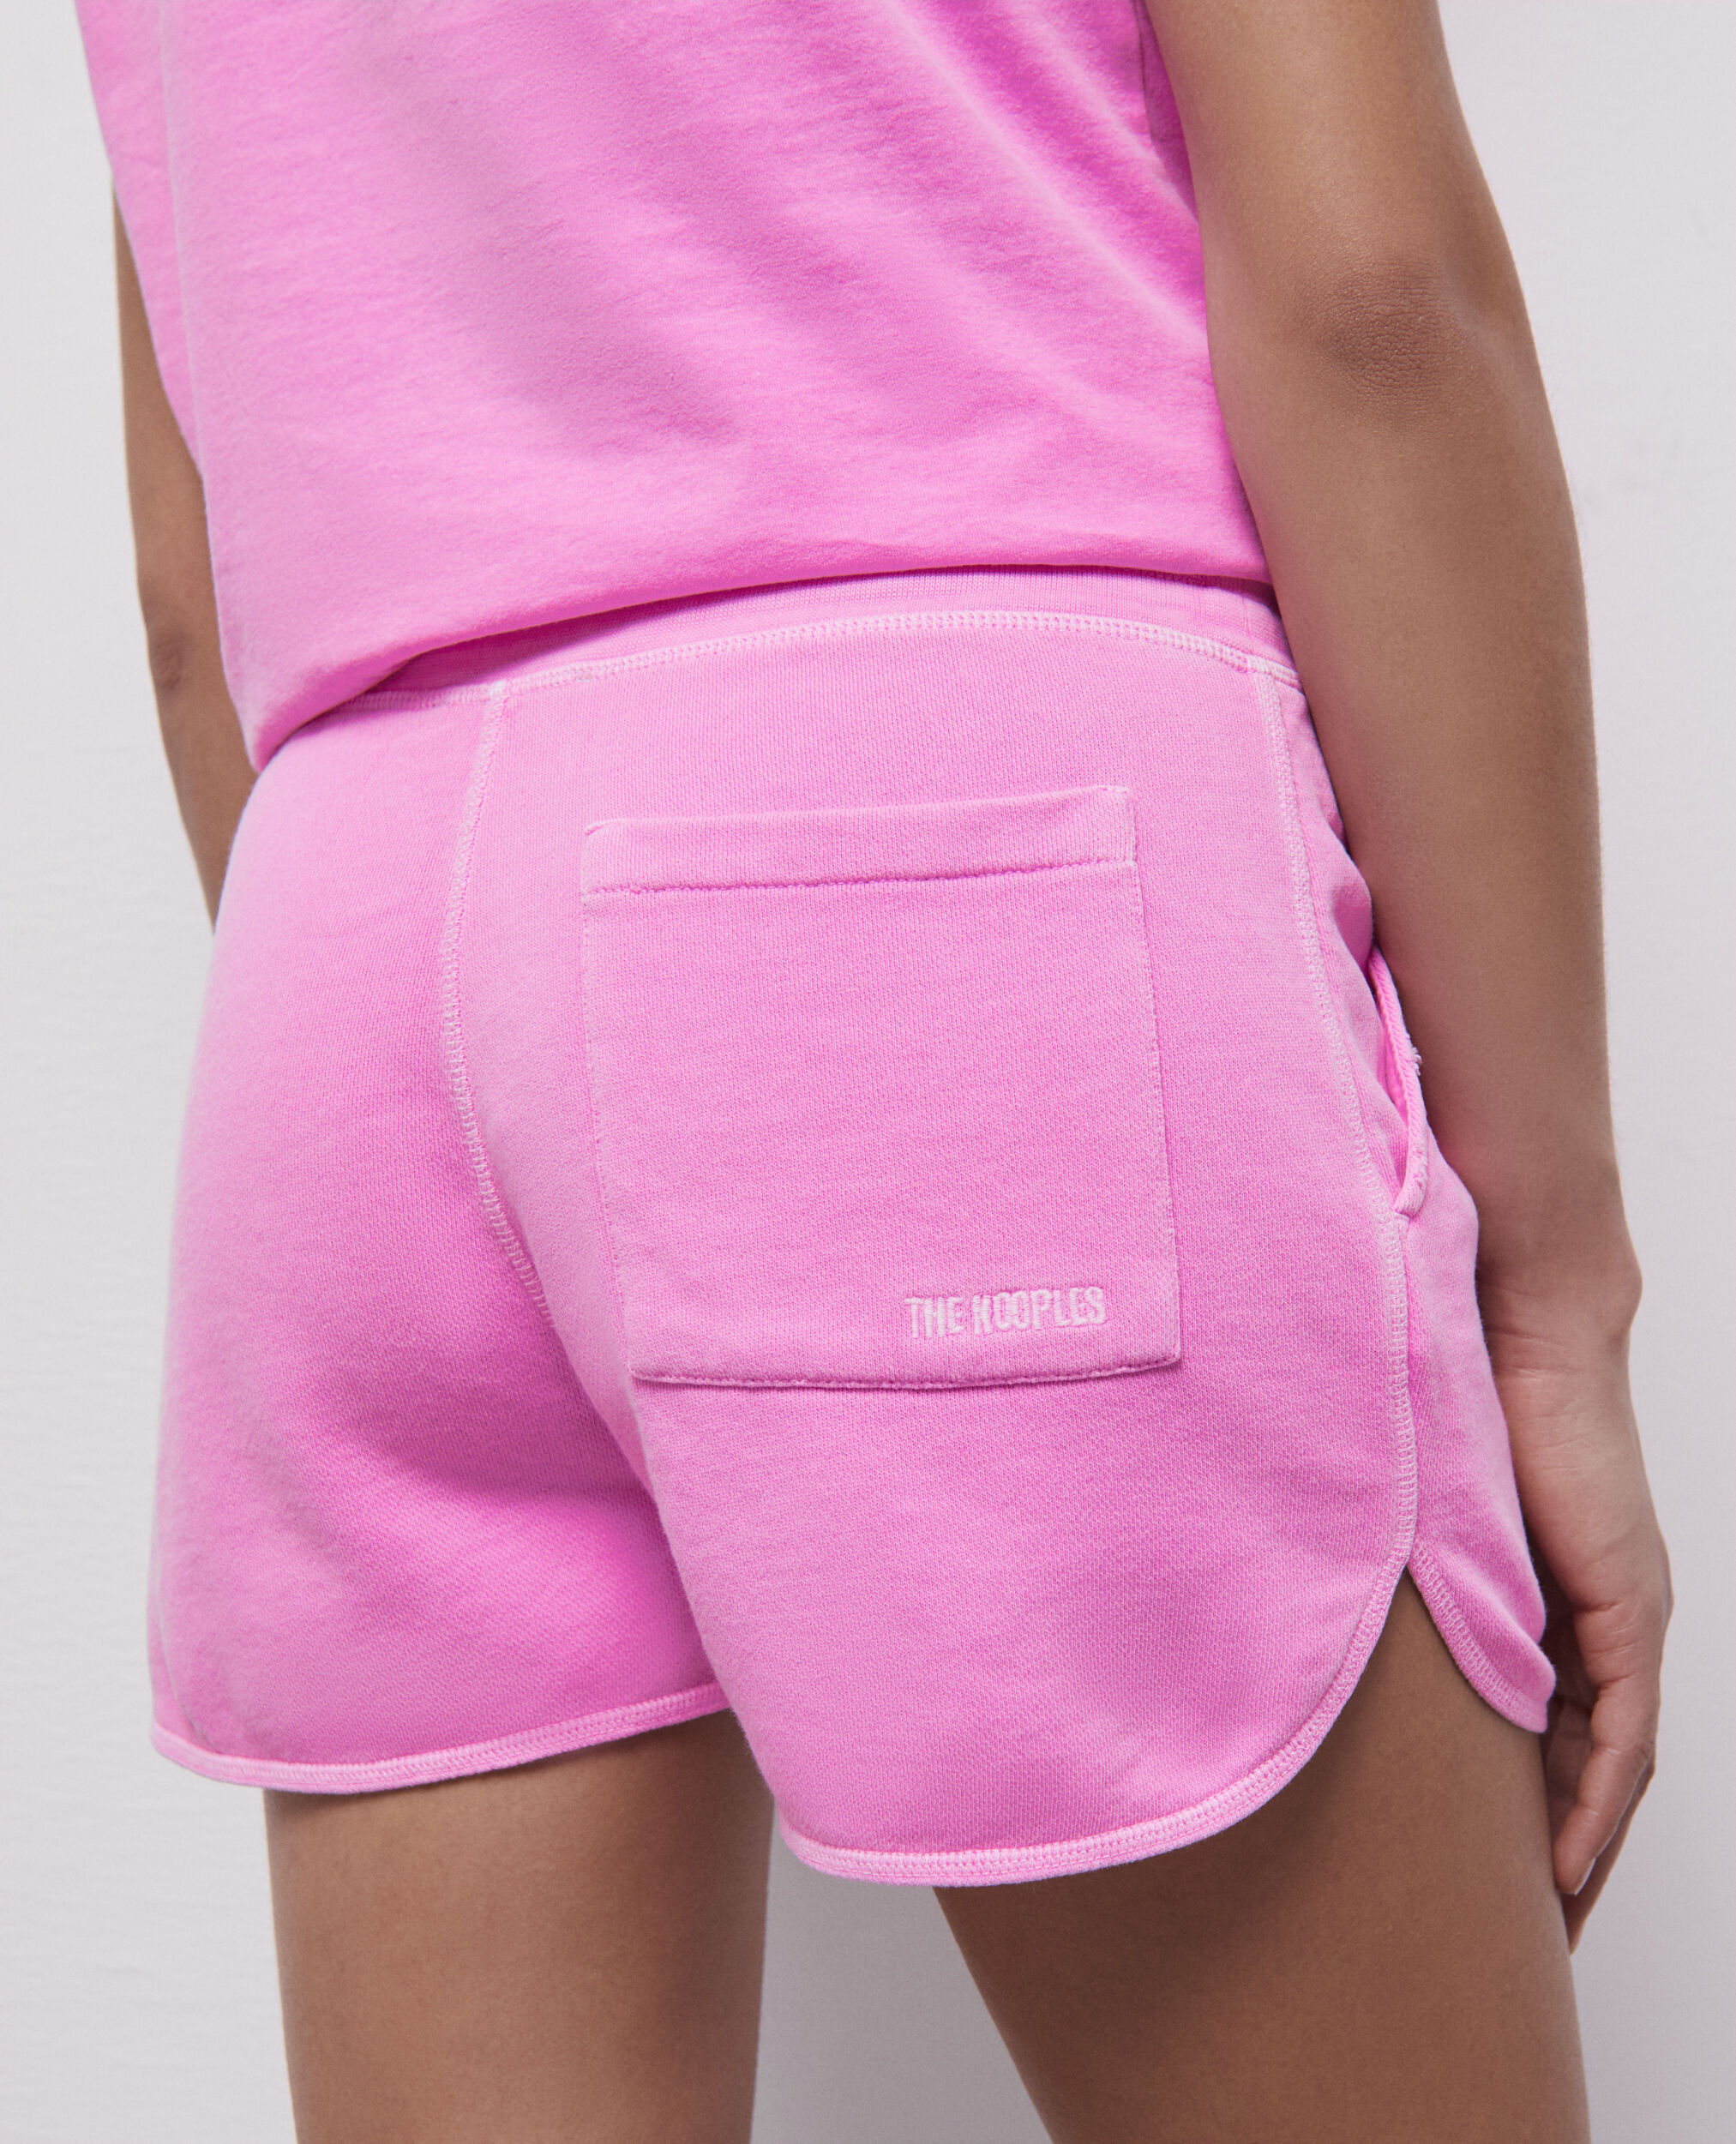 Fluorescent pink fleece shorts with logo, FLUO PINK, hi-res image number null